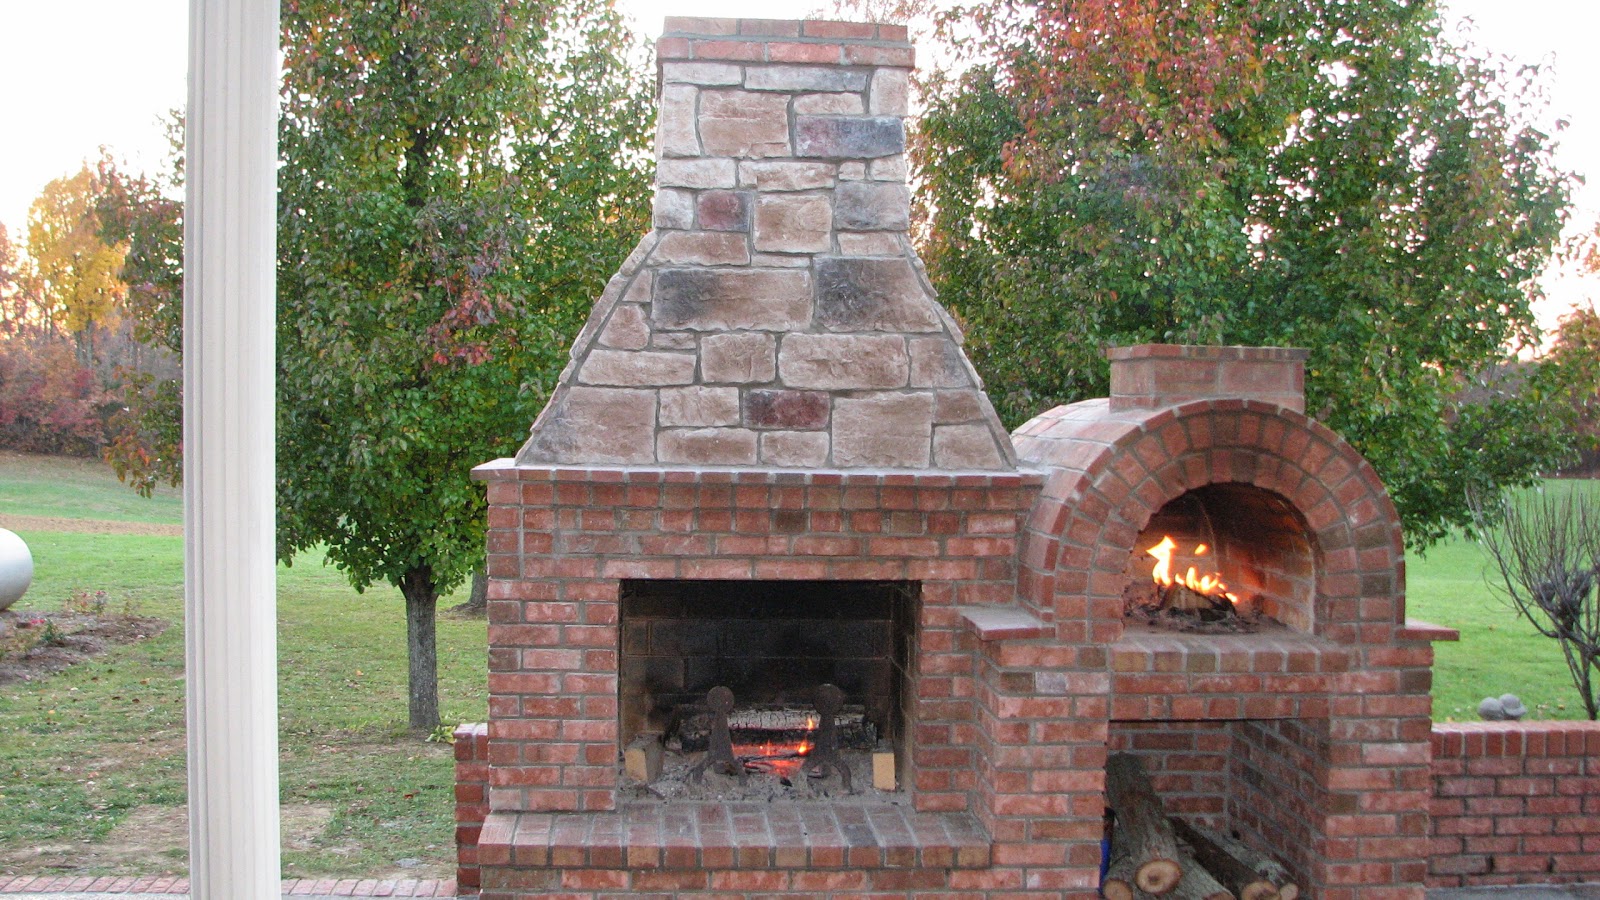 File name: beautiful+wood+fired+brick+pizza+oven+and+fireplace+combo ...